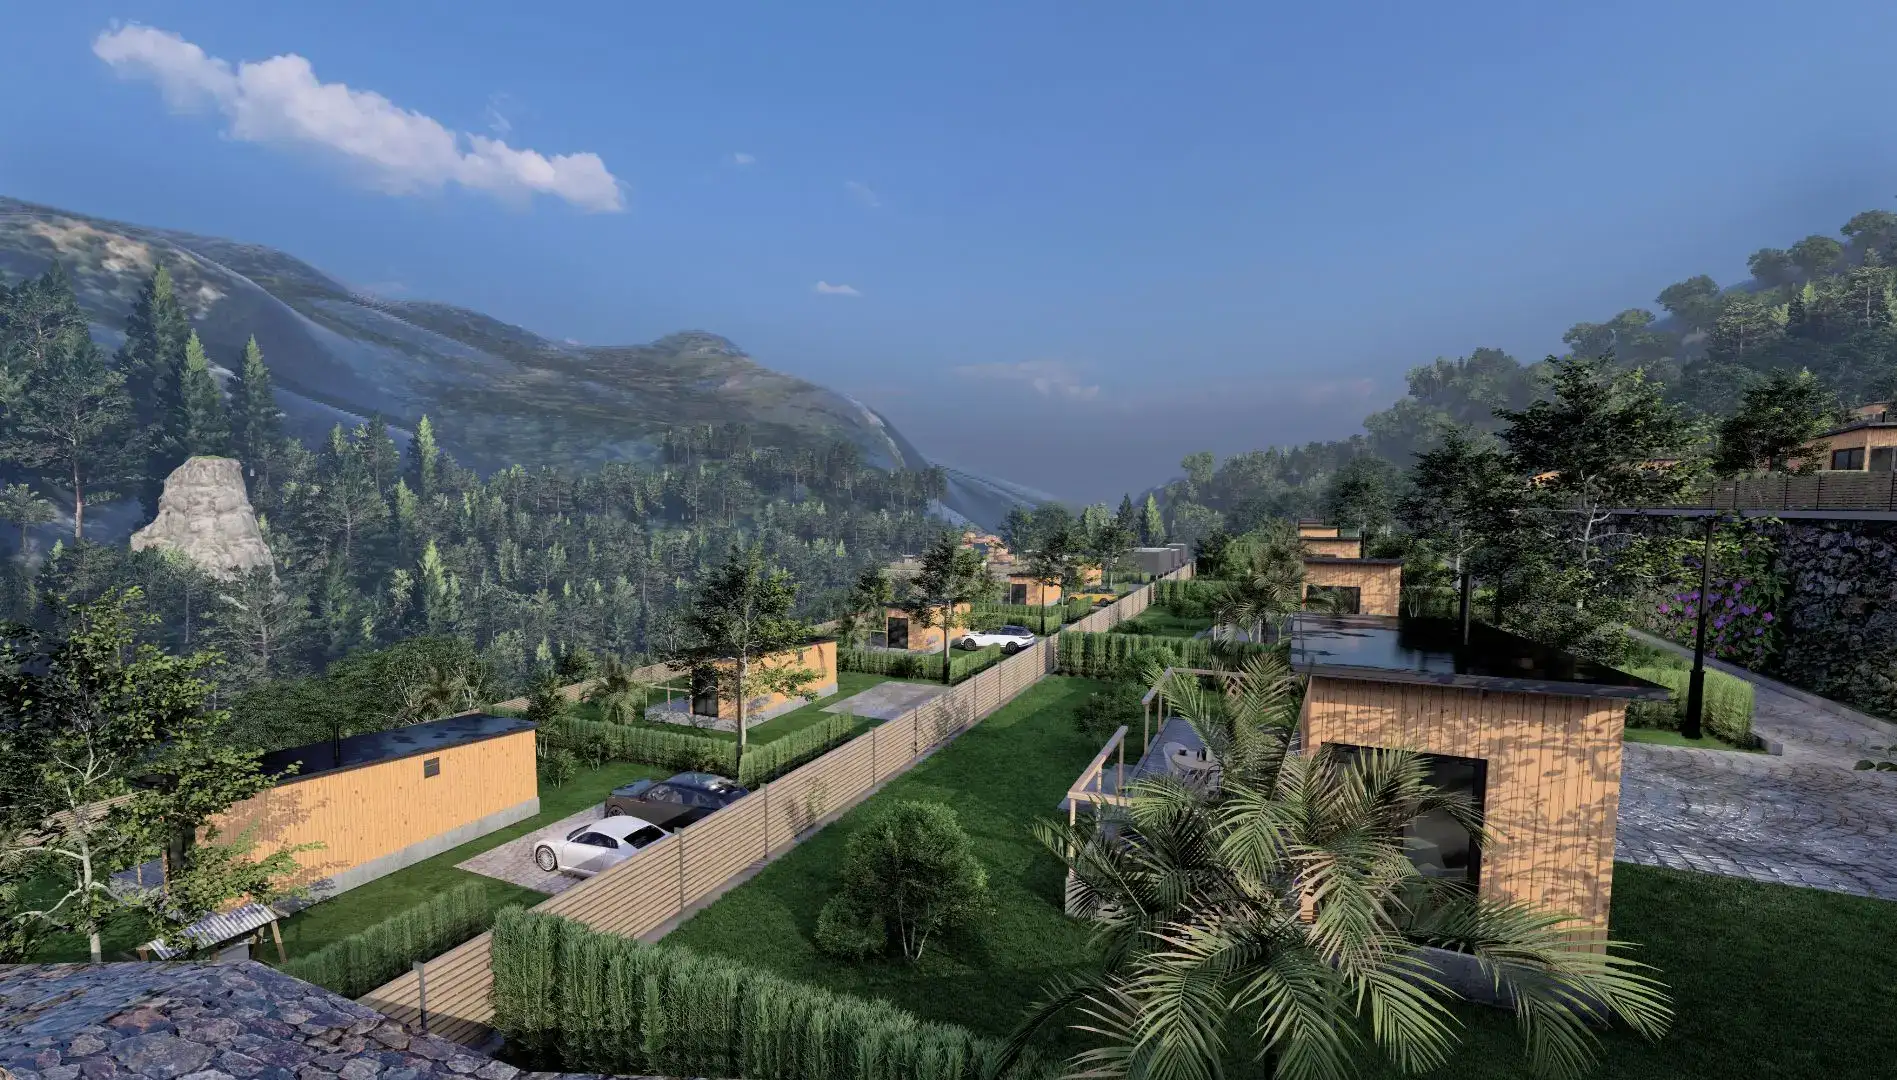 COMPLEX OF COUNTRY HOUSES SURROUNDED WITH INCREDIBLE VIEWS FOR SALE